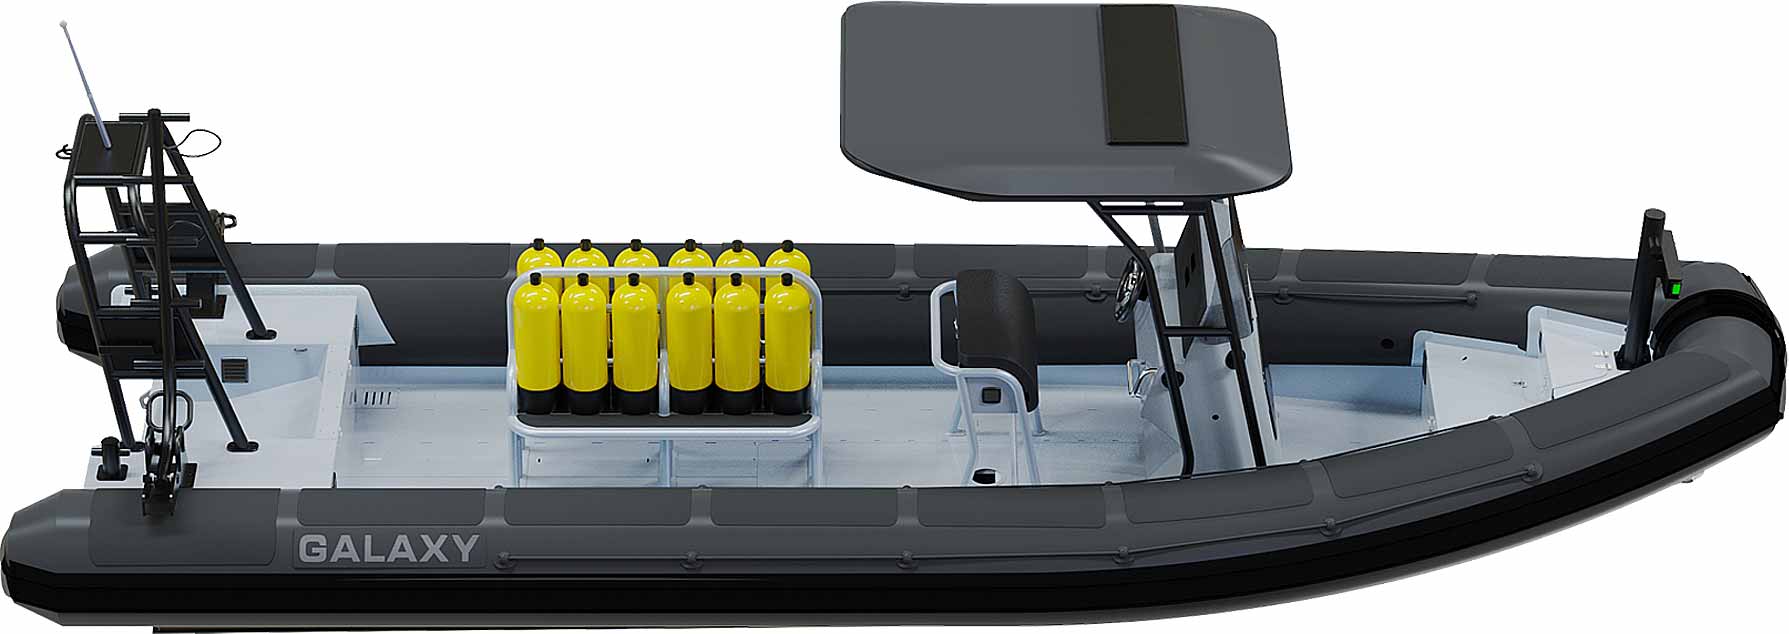 GALAXY PILOT professional rigid inflatable boat (RIB) at 25′ 7″ long, rated max 500 HP, SCUBA configuration with aluminum hull, steering console, seating, T-top, air tank storage.